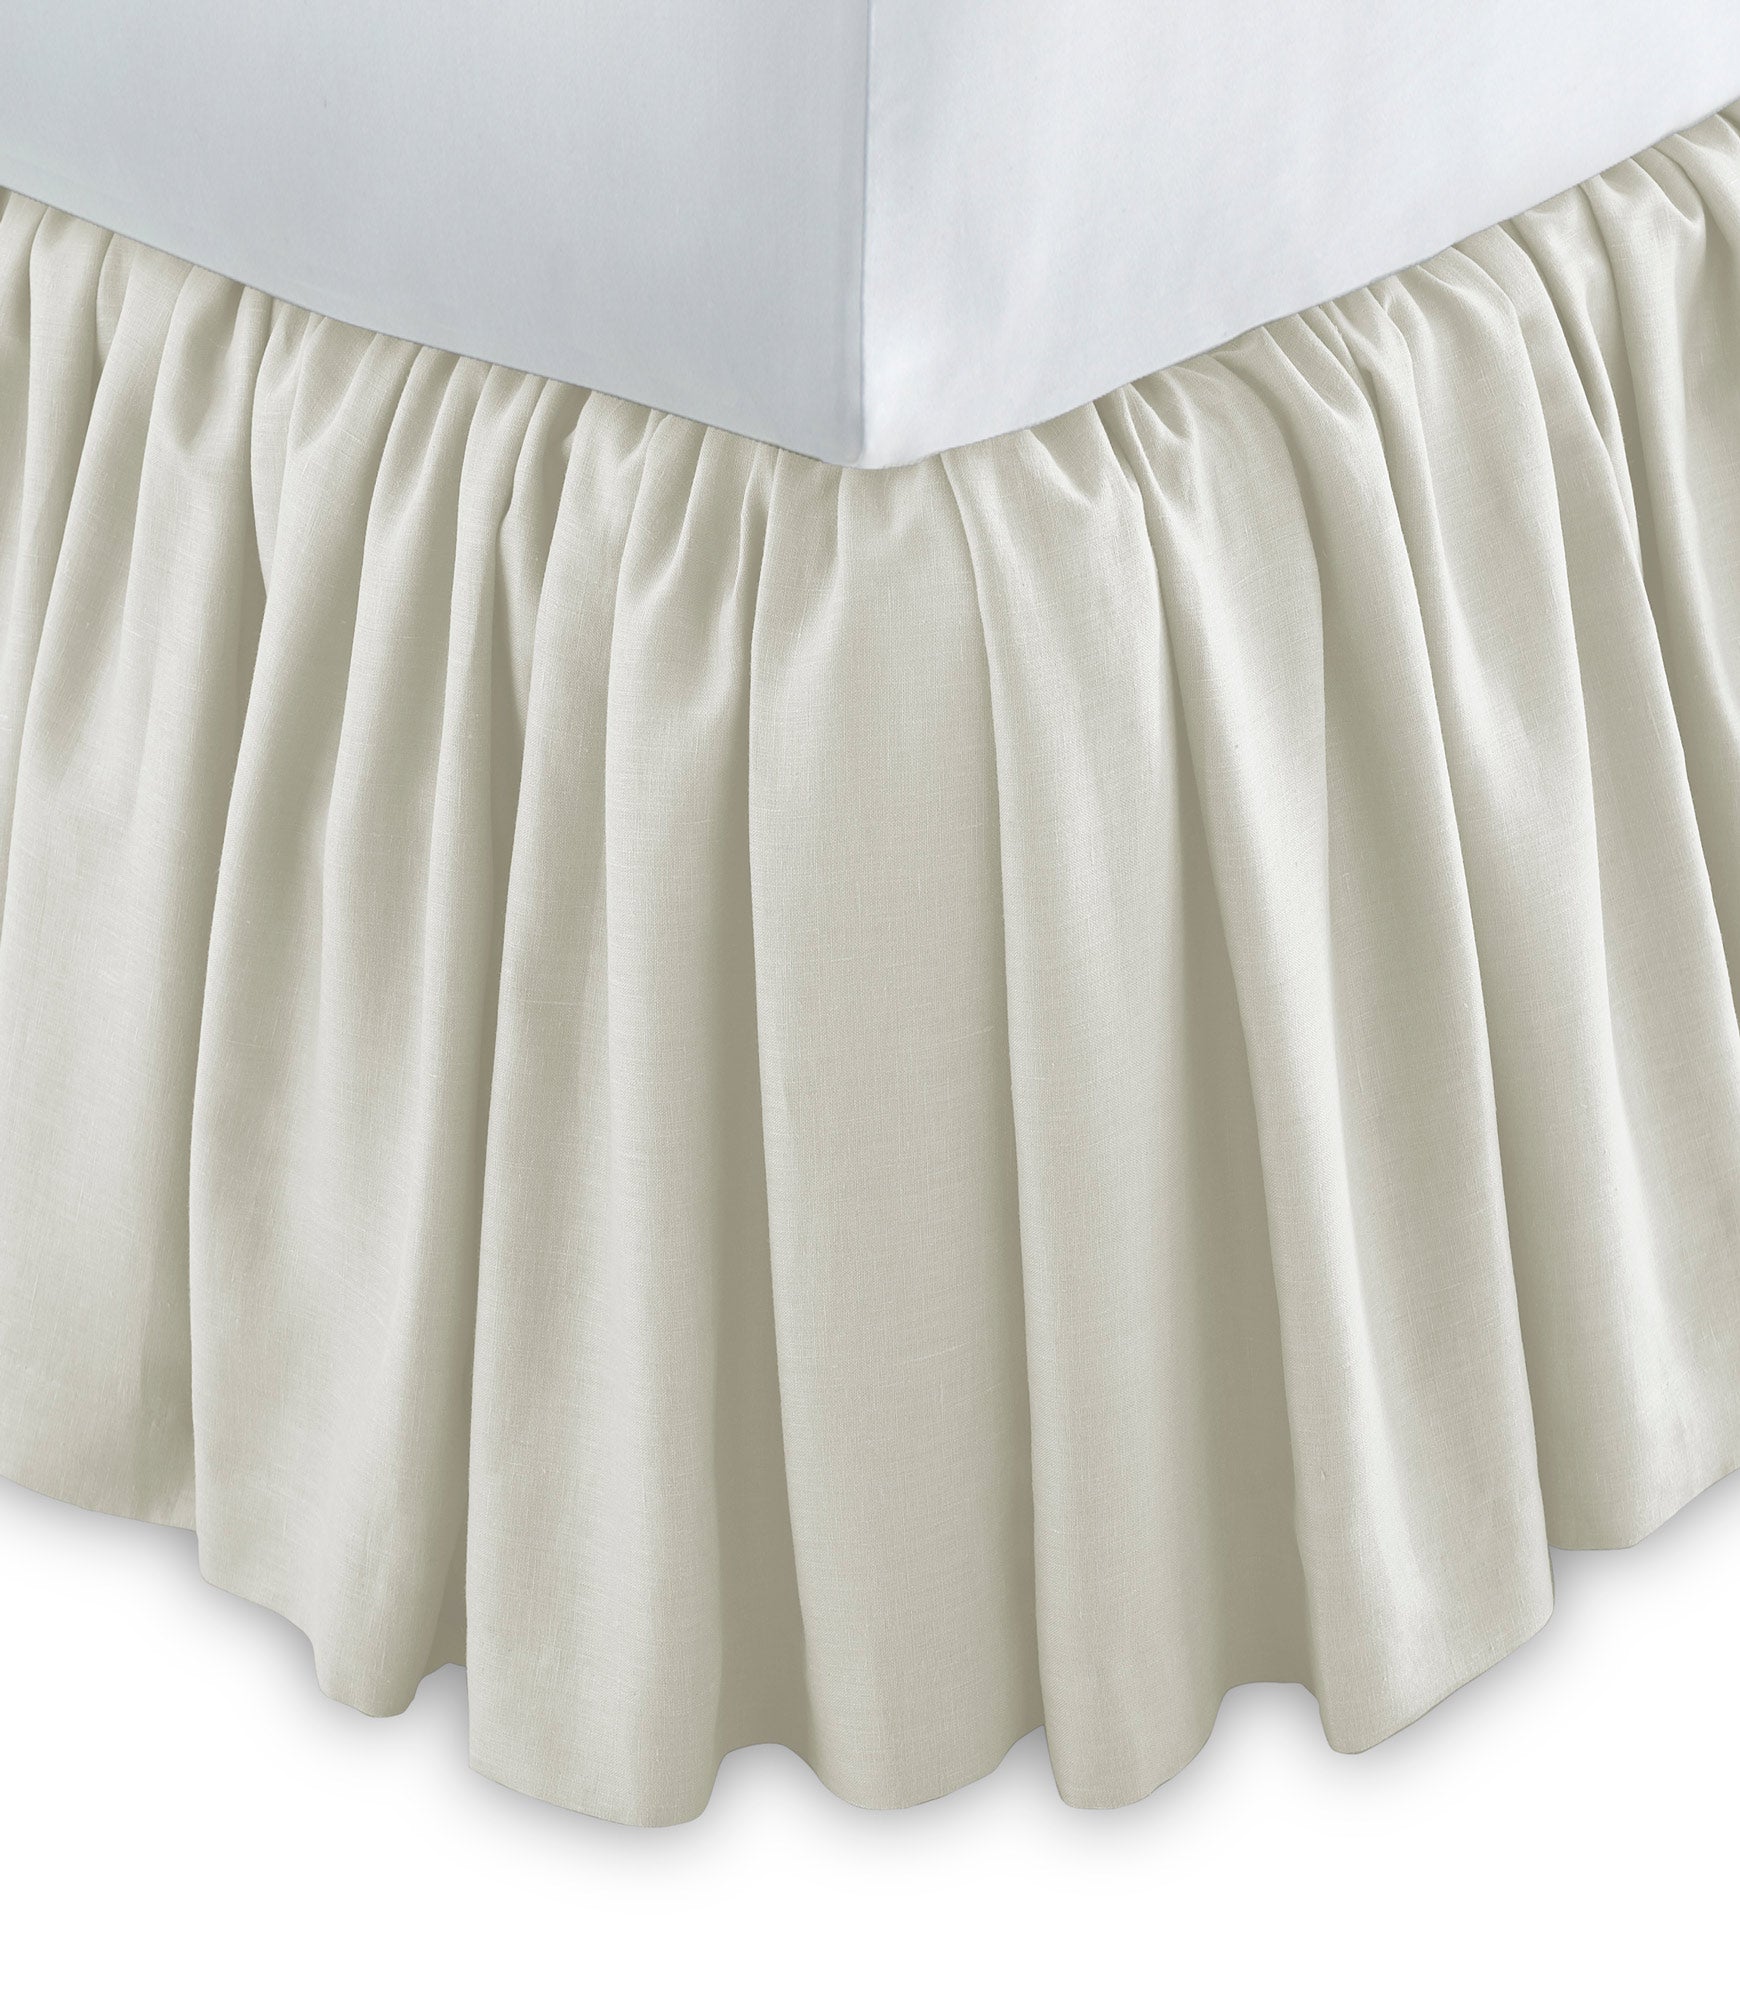 White Linen Bed Skirt- Gathered with Country Ruffle Hem